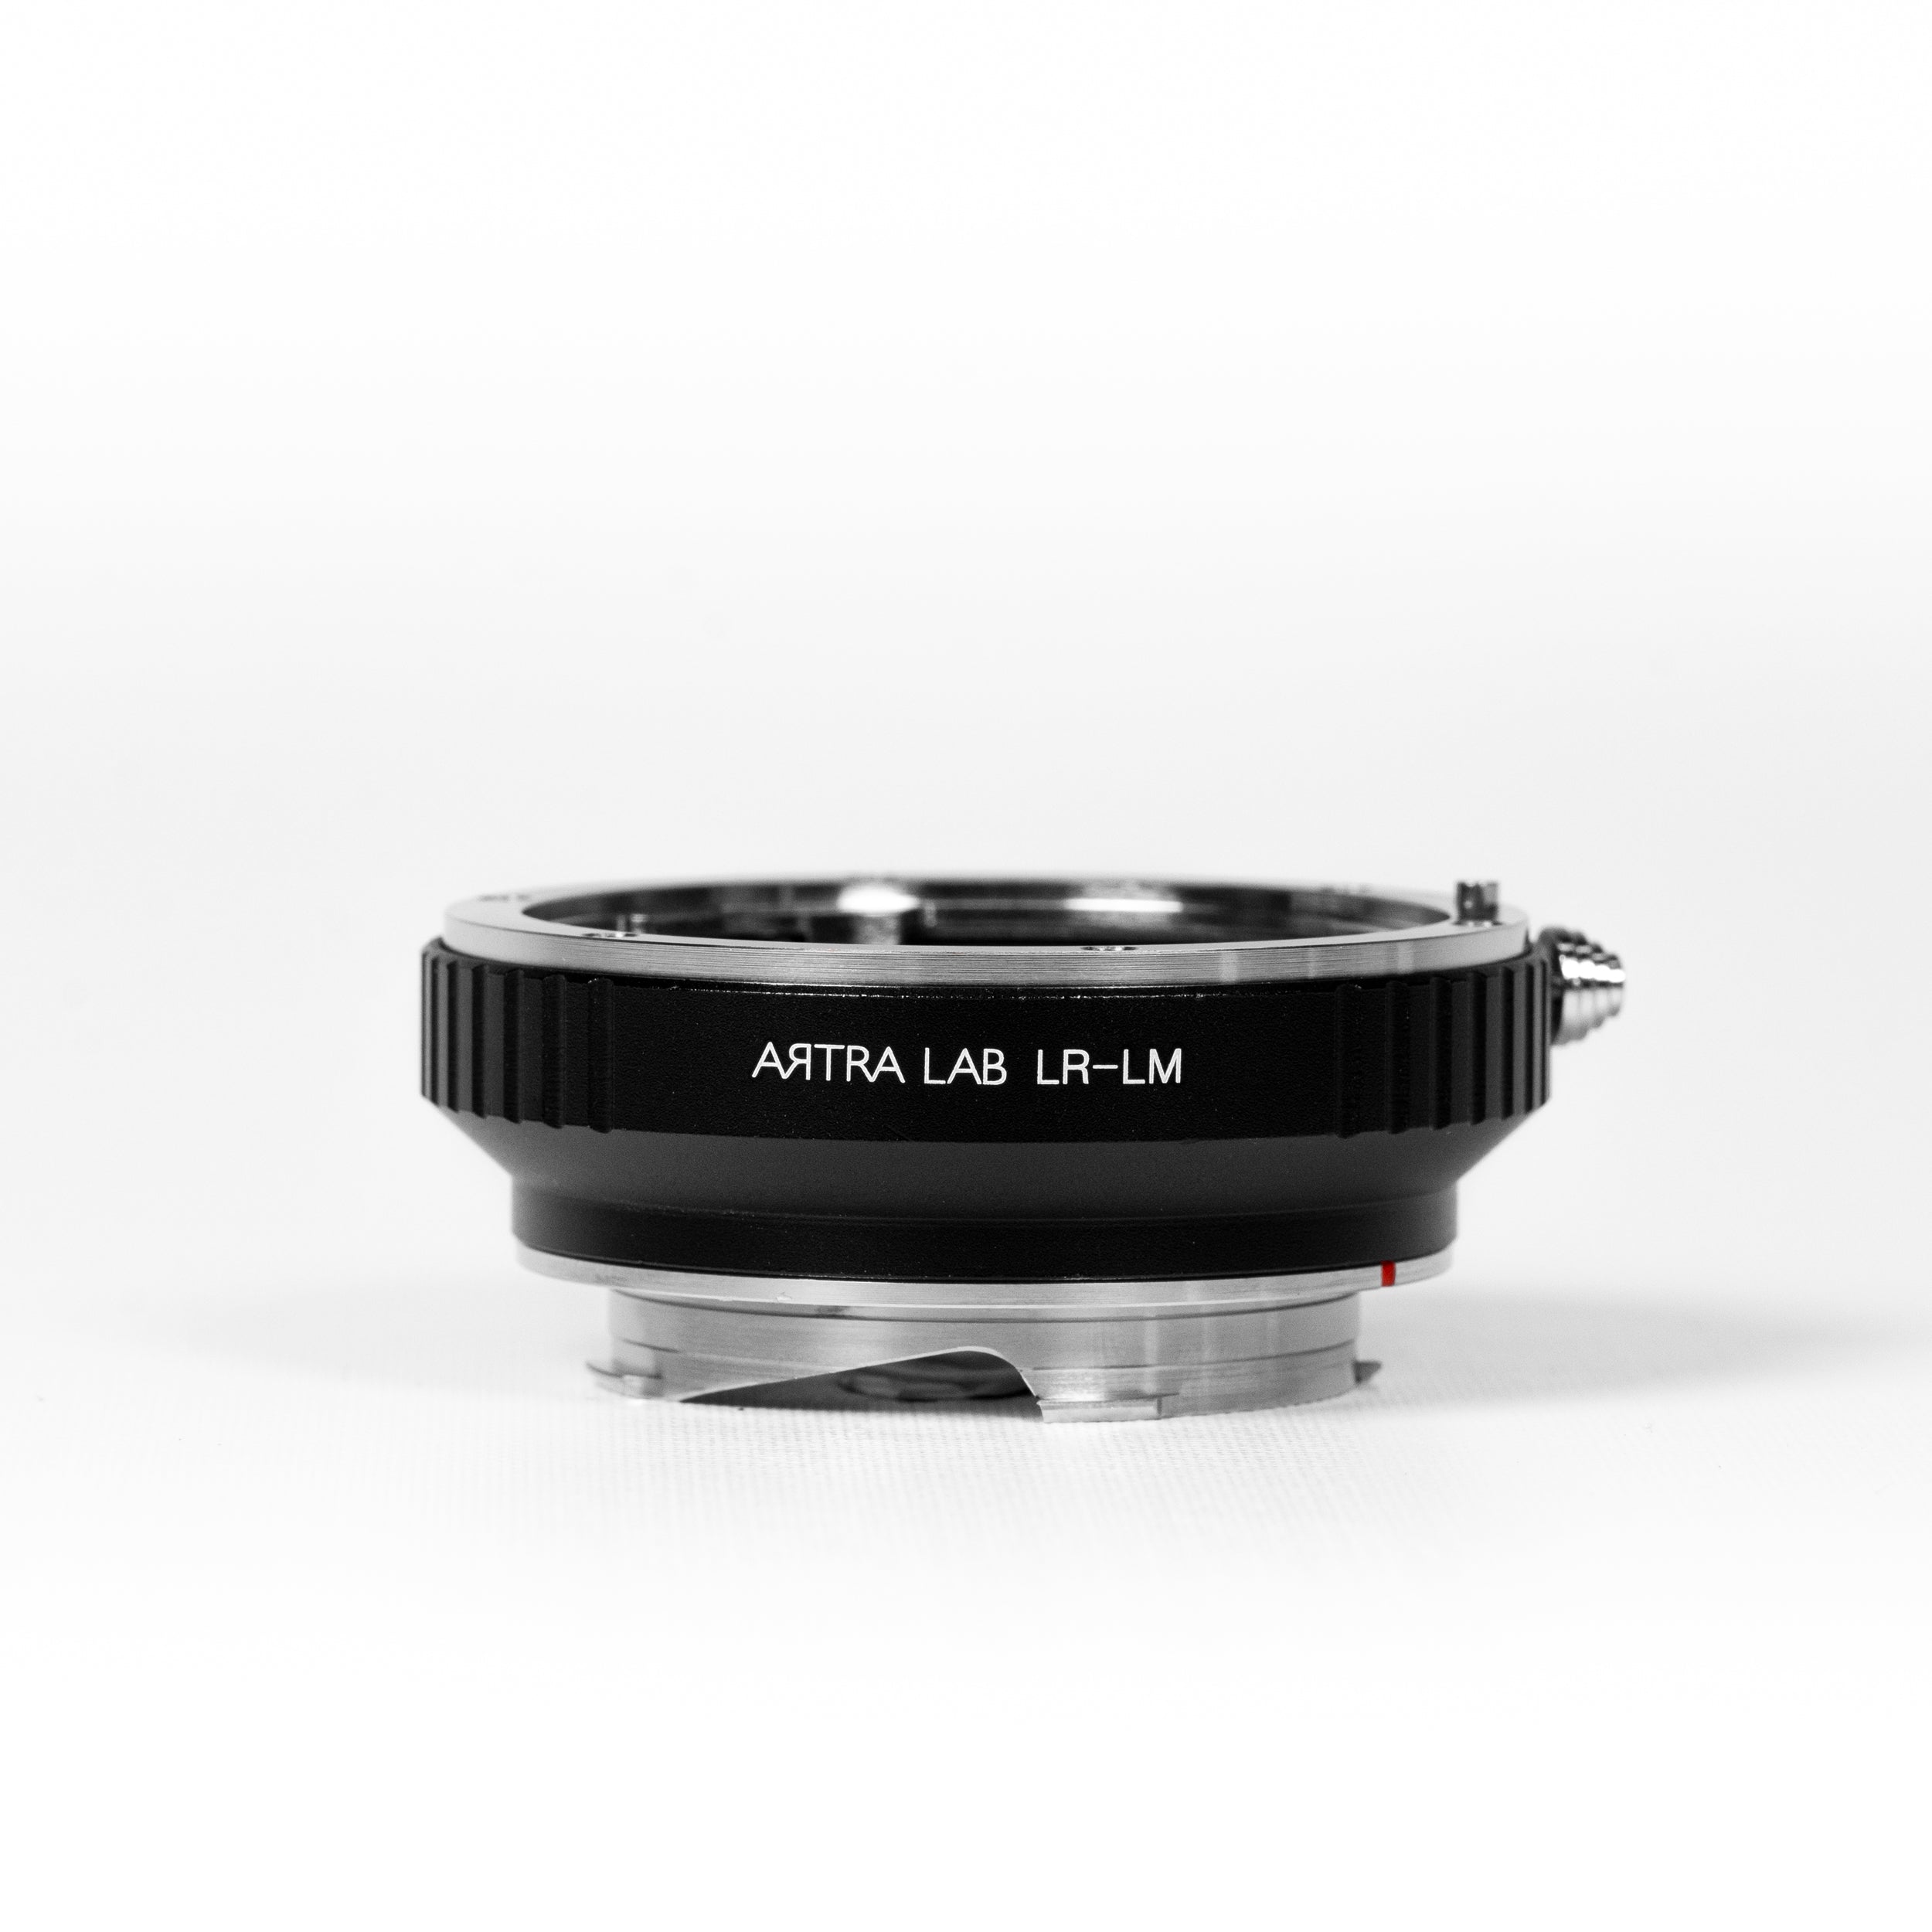 ARTRA LAB LEICA R MOUNT TO LEICA M MOUNT ADAPTER